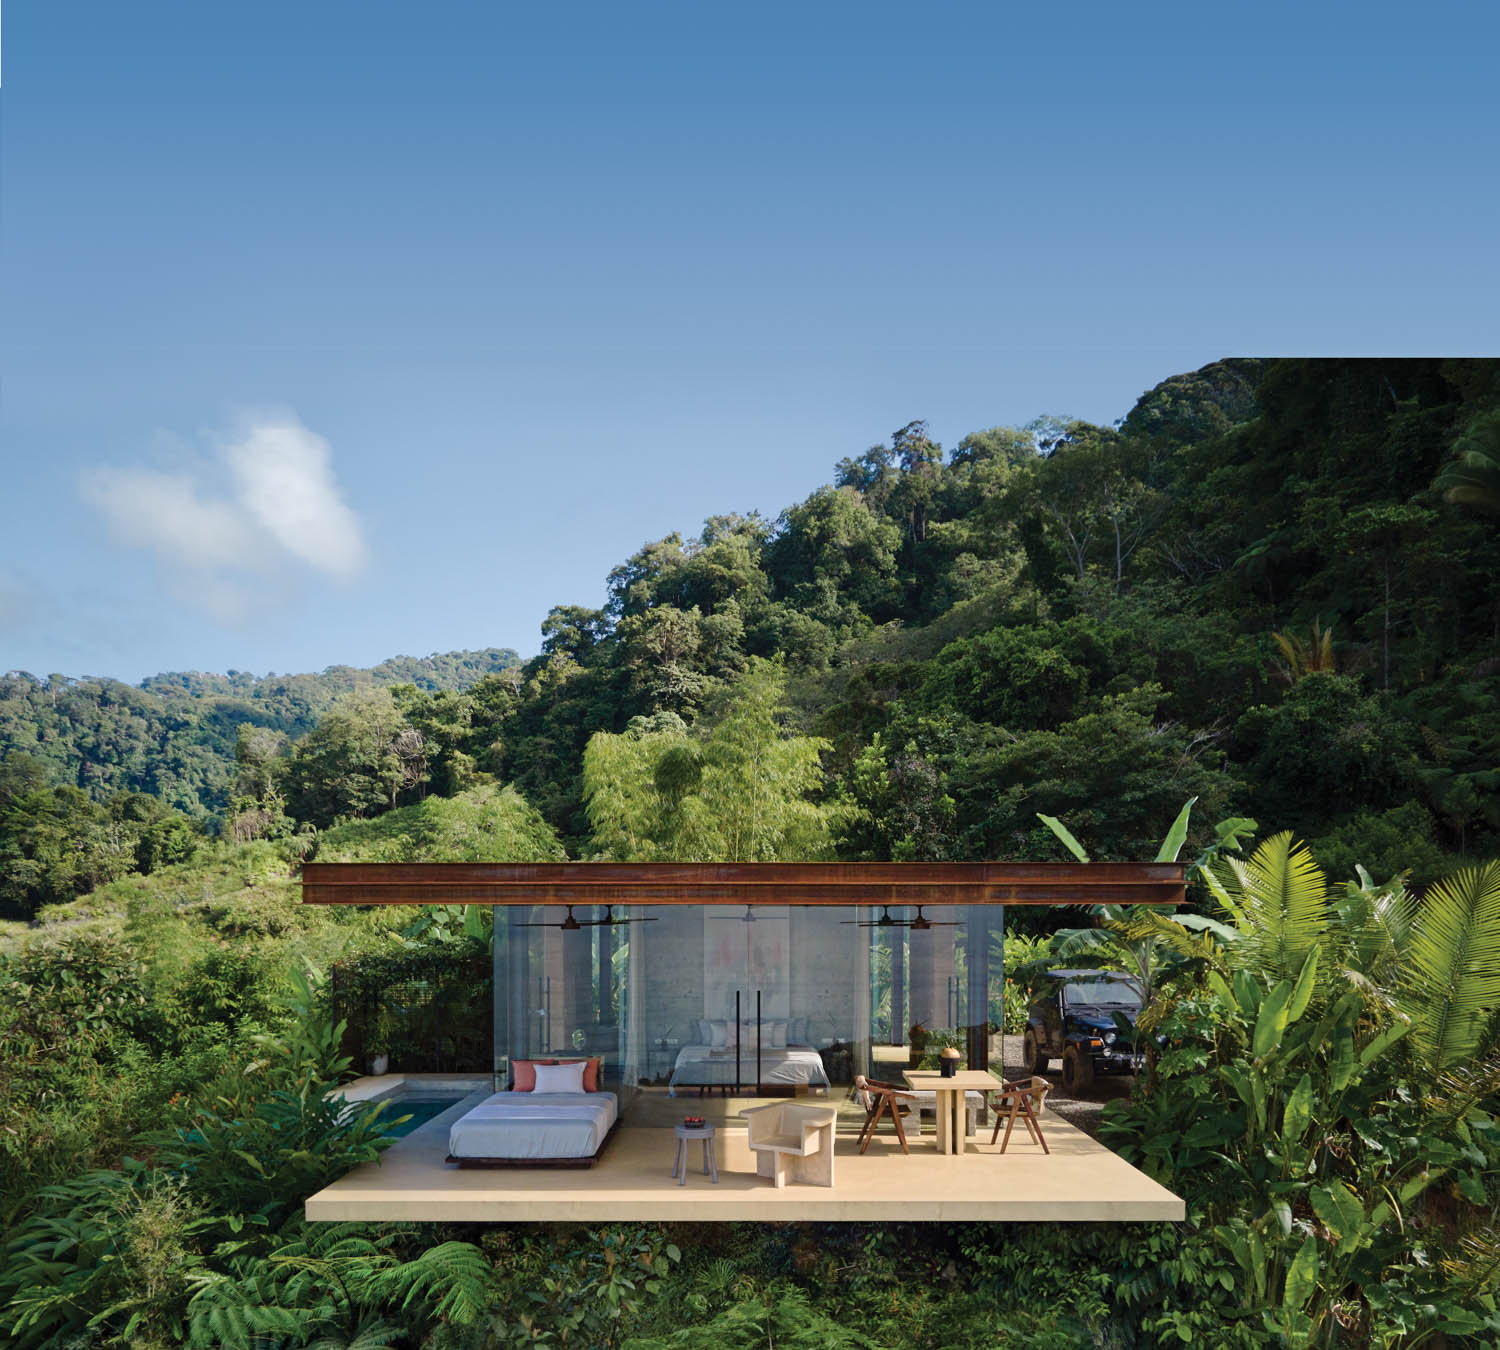 a rental villa jutting out from a steep jungle slope